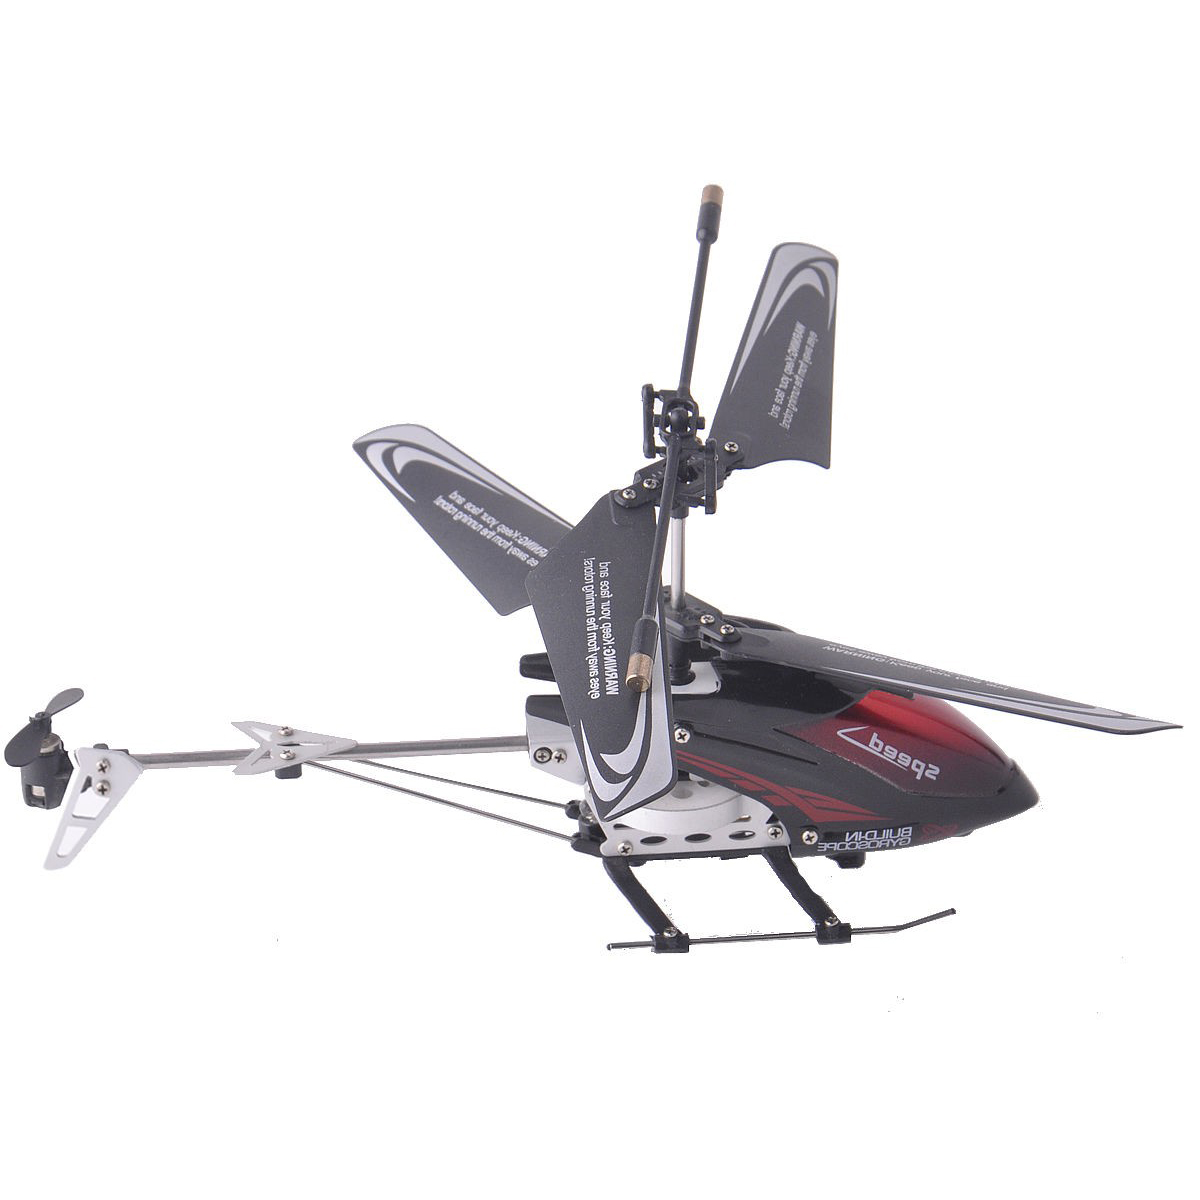 3 - Channel RC iPhone Remote Control Helicopter iPhone Control Black New